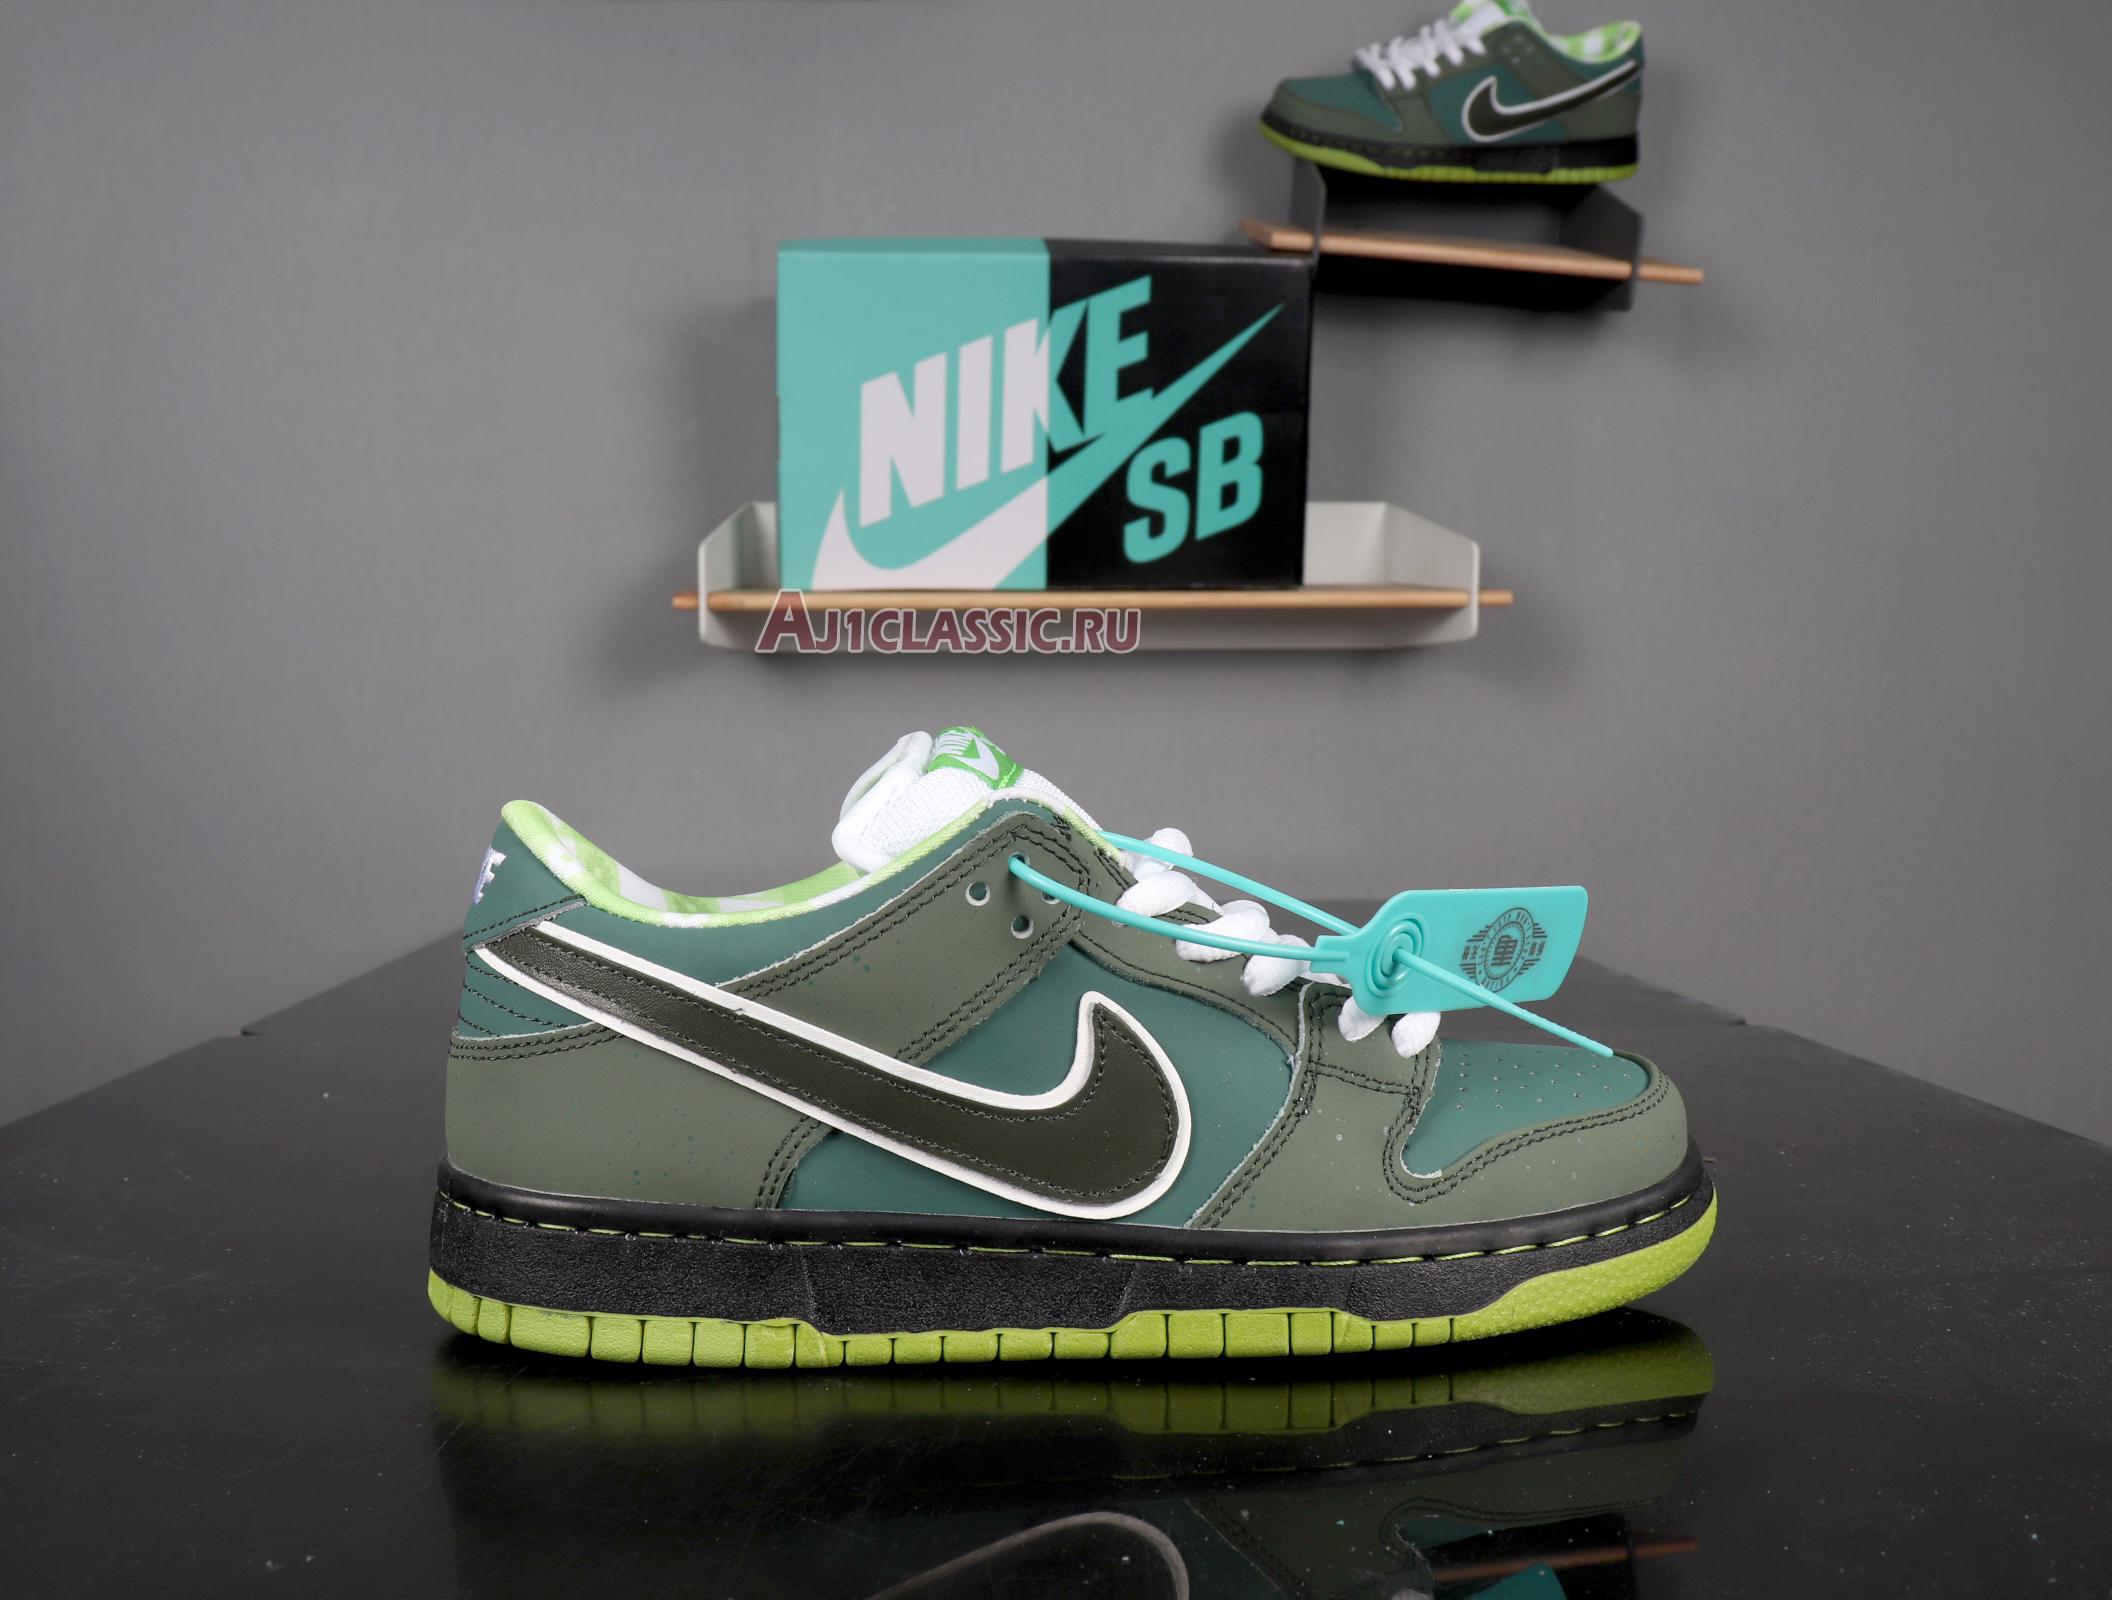 Nike Concepts x Dunk Low SB "Green Lobster" Special Box BV1310-337